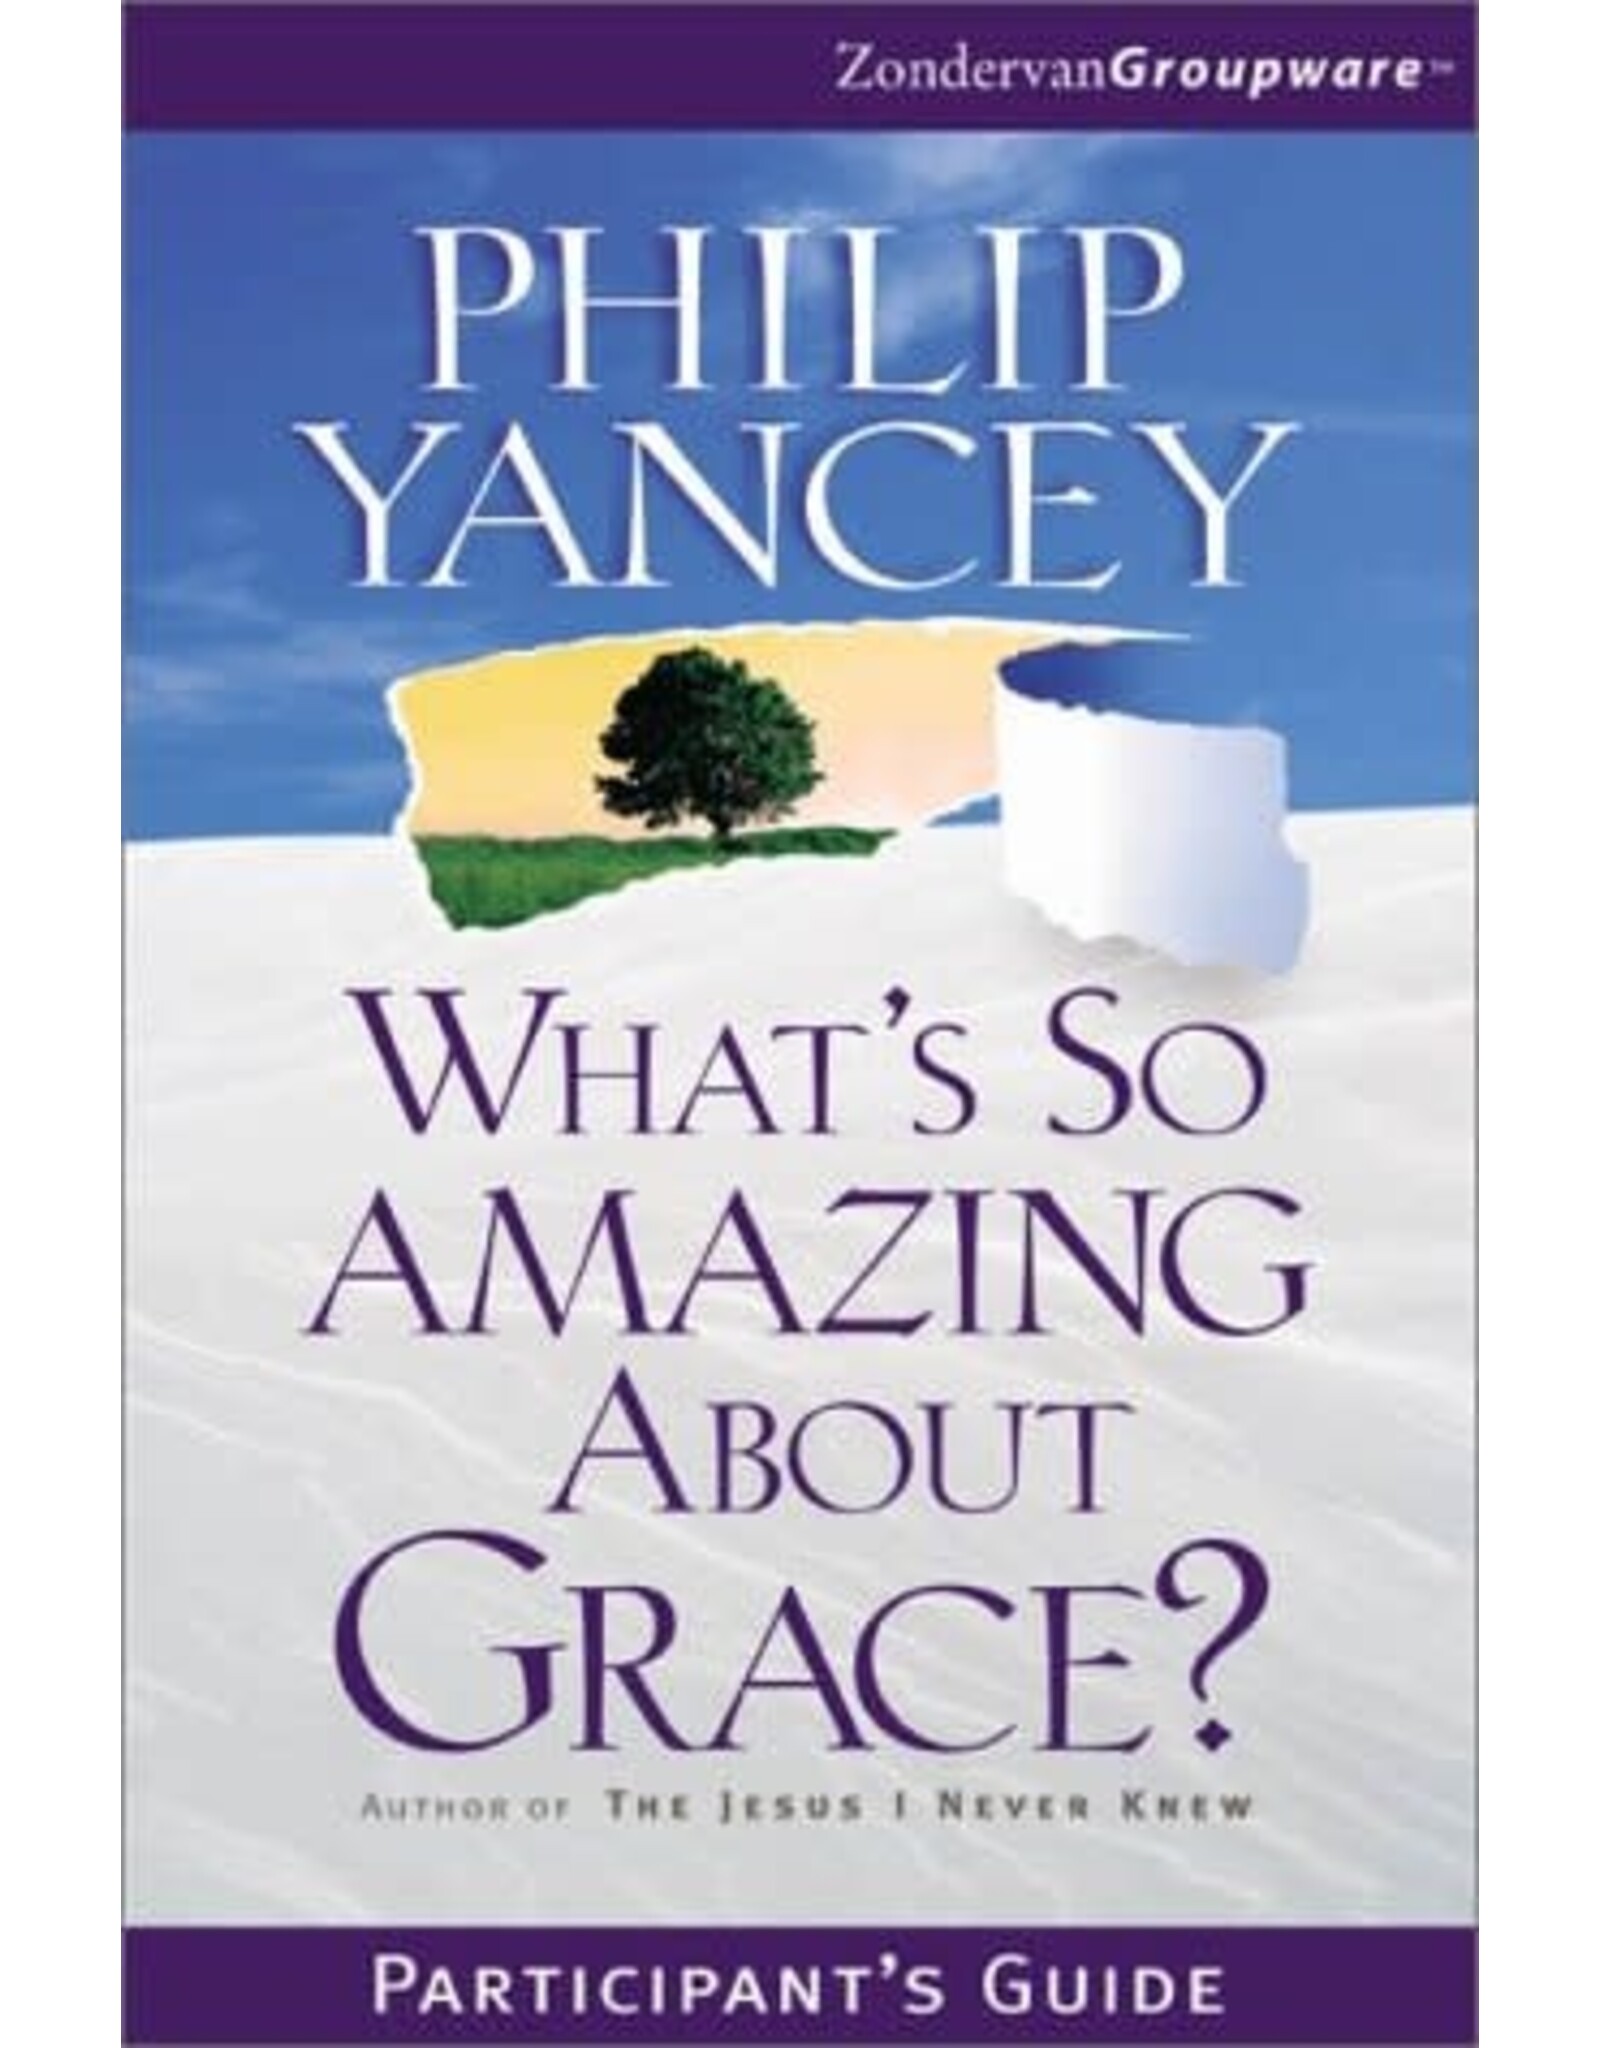 What's So Amazing About Grace?